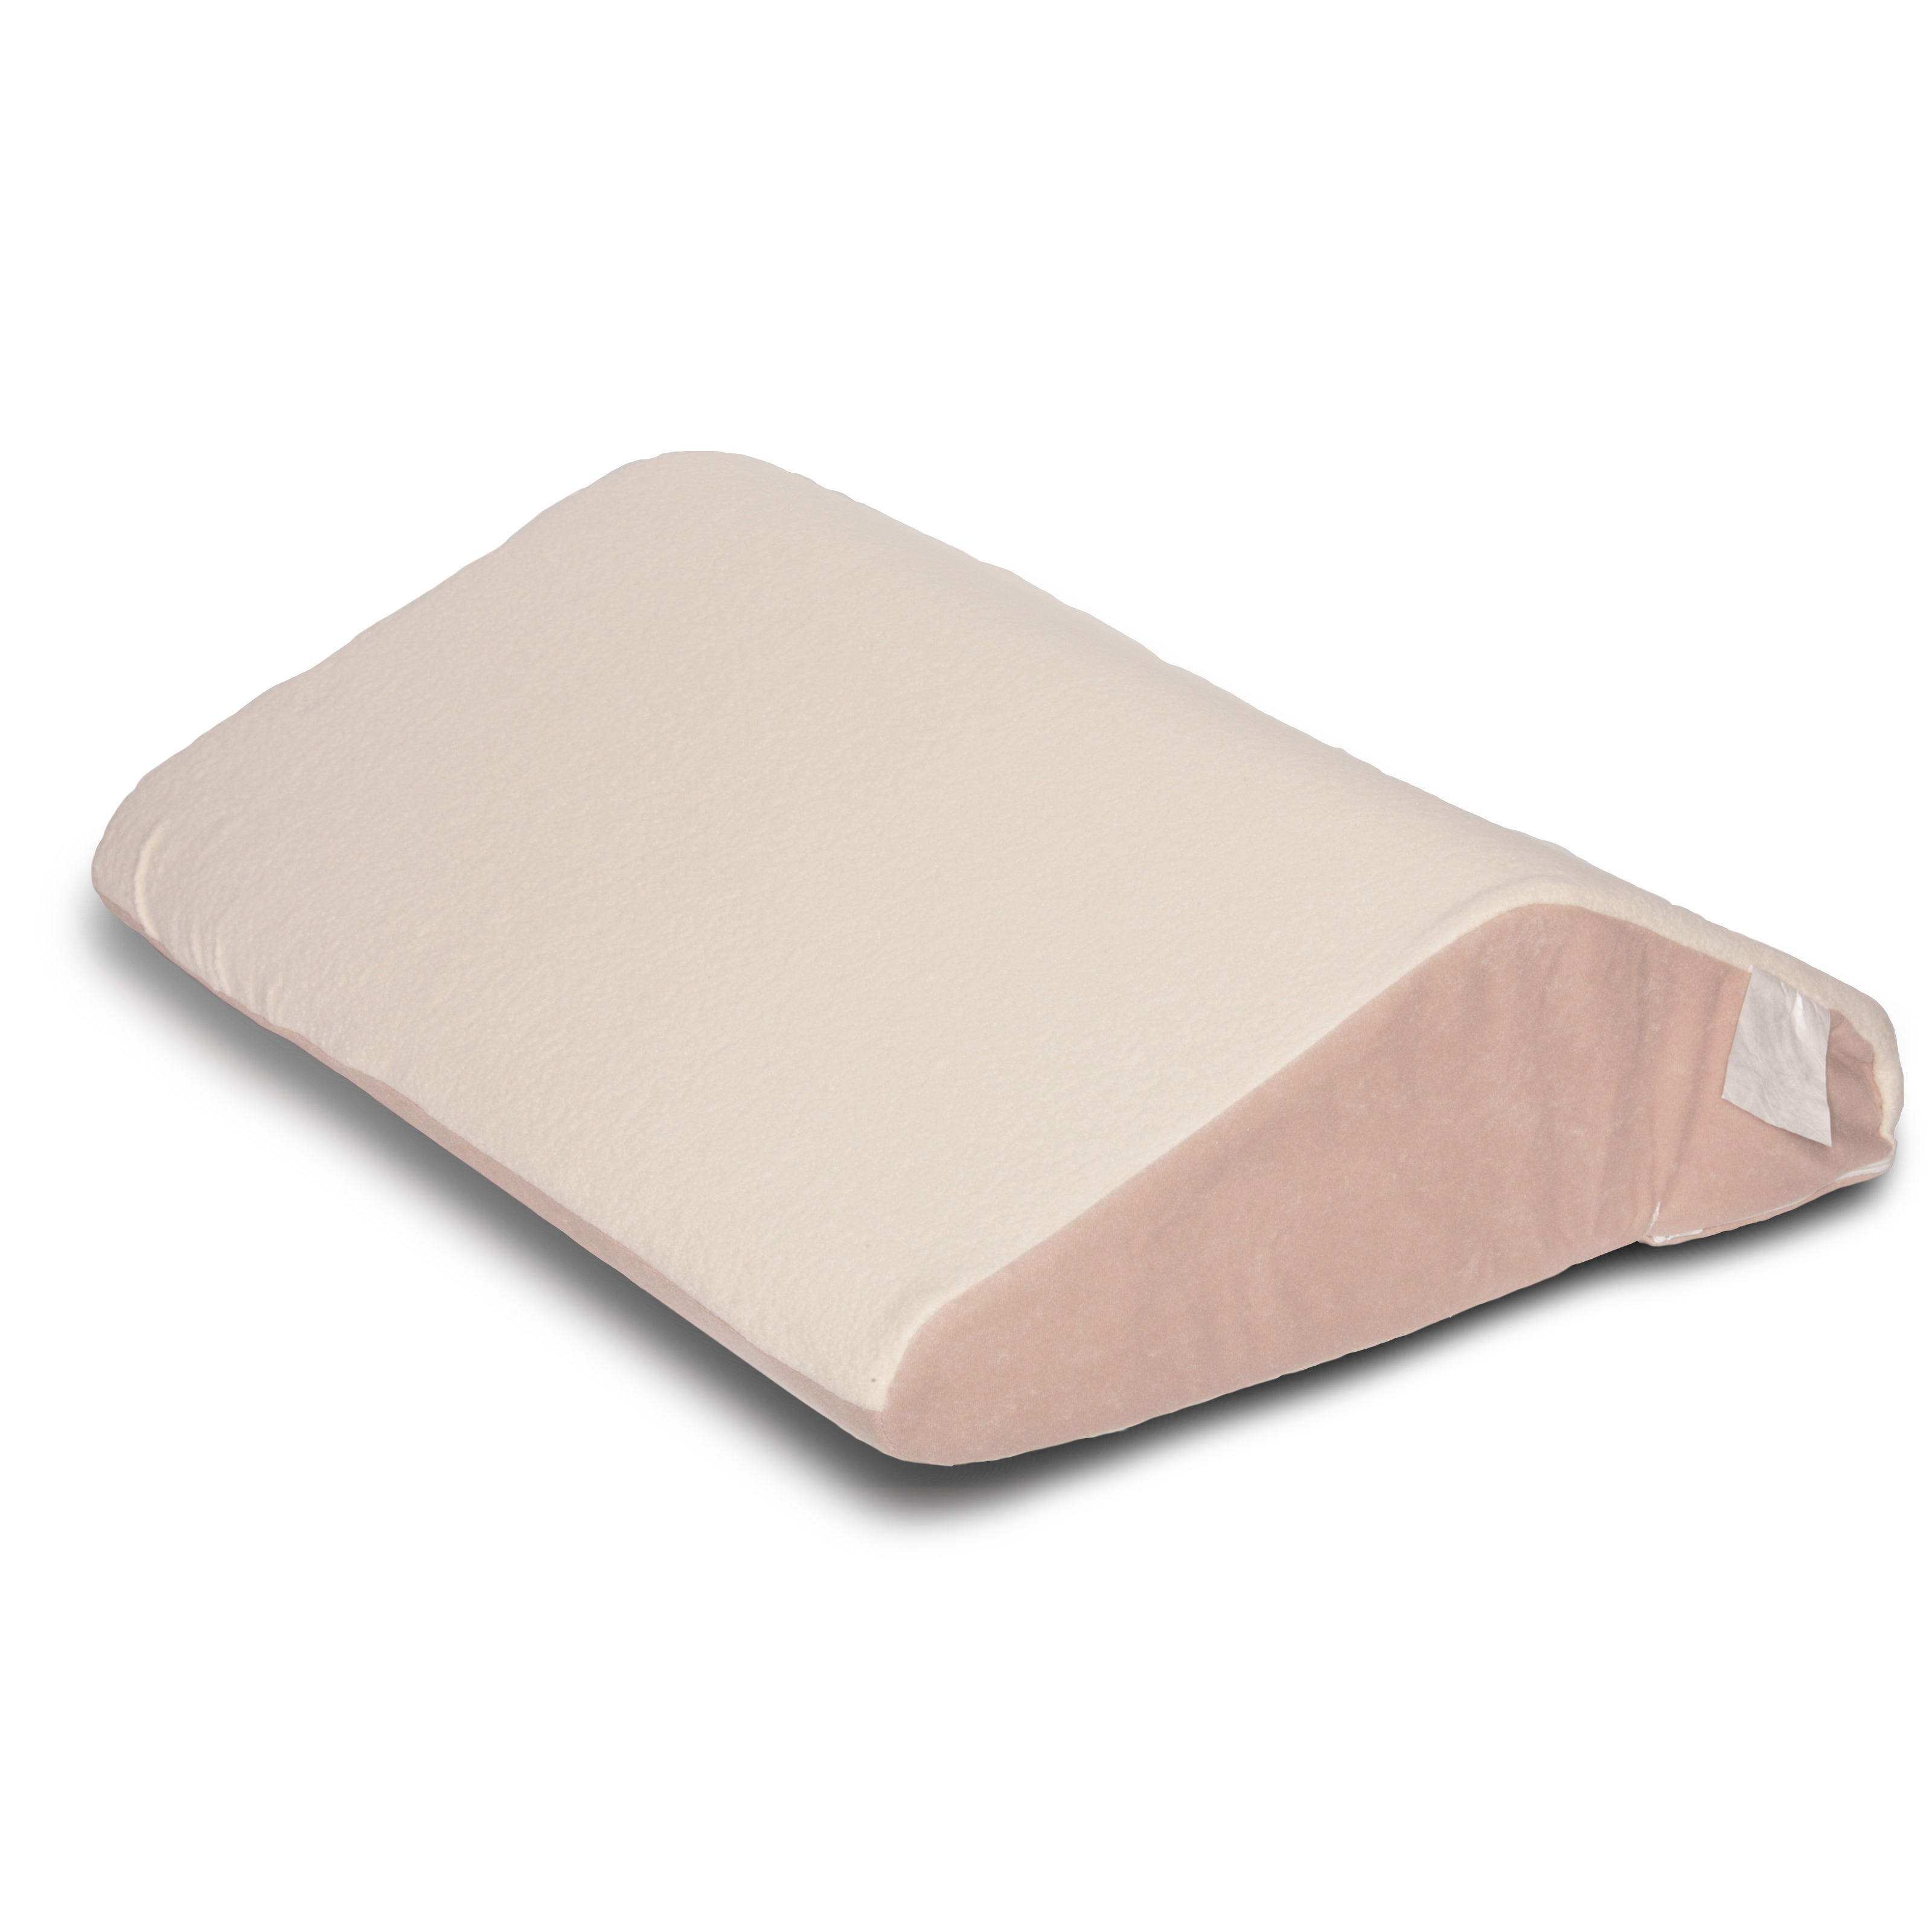 https://ak1.ostkcdn.com/images/products/12027424/Sloped-Knee-Lift-Foam-Pillow-with-Sherpa-Cover-72d96f19-8cbb-4cc3-81a3-0d7ede7e44c0.jpg